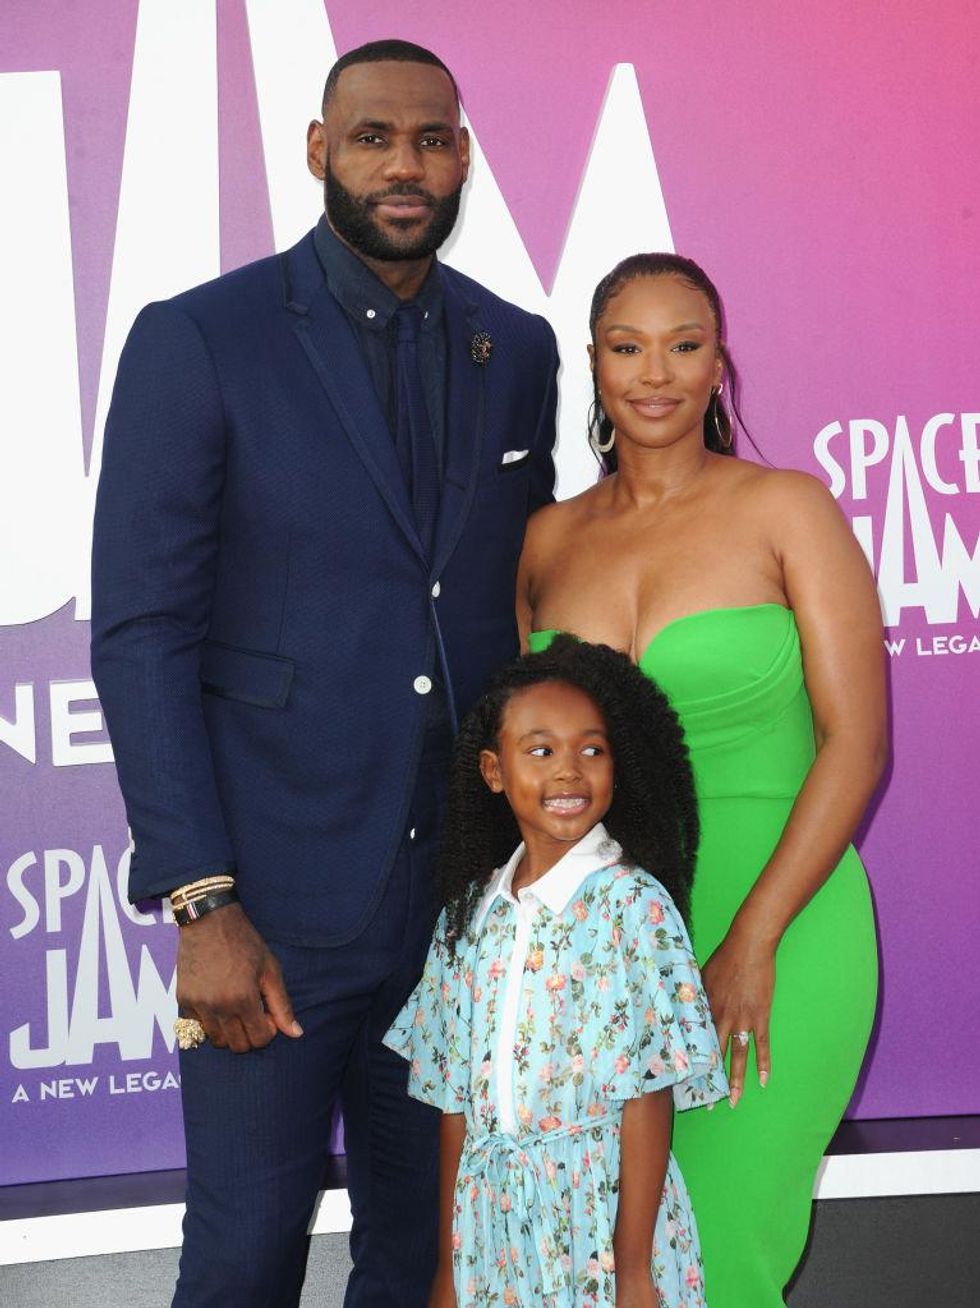 Who Is LeBron James's Wife, Savannah Brinson? - More About LeBron James's  Marriage and Kids